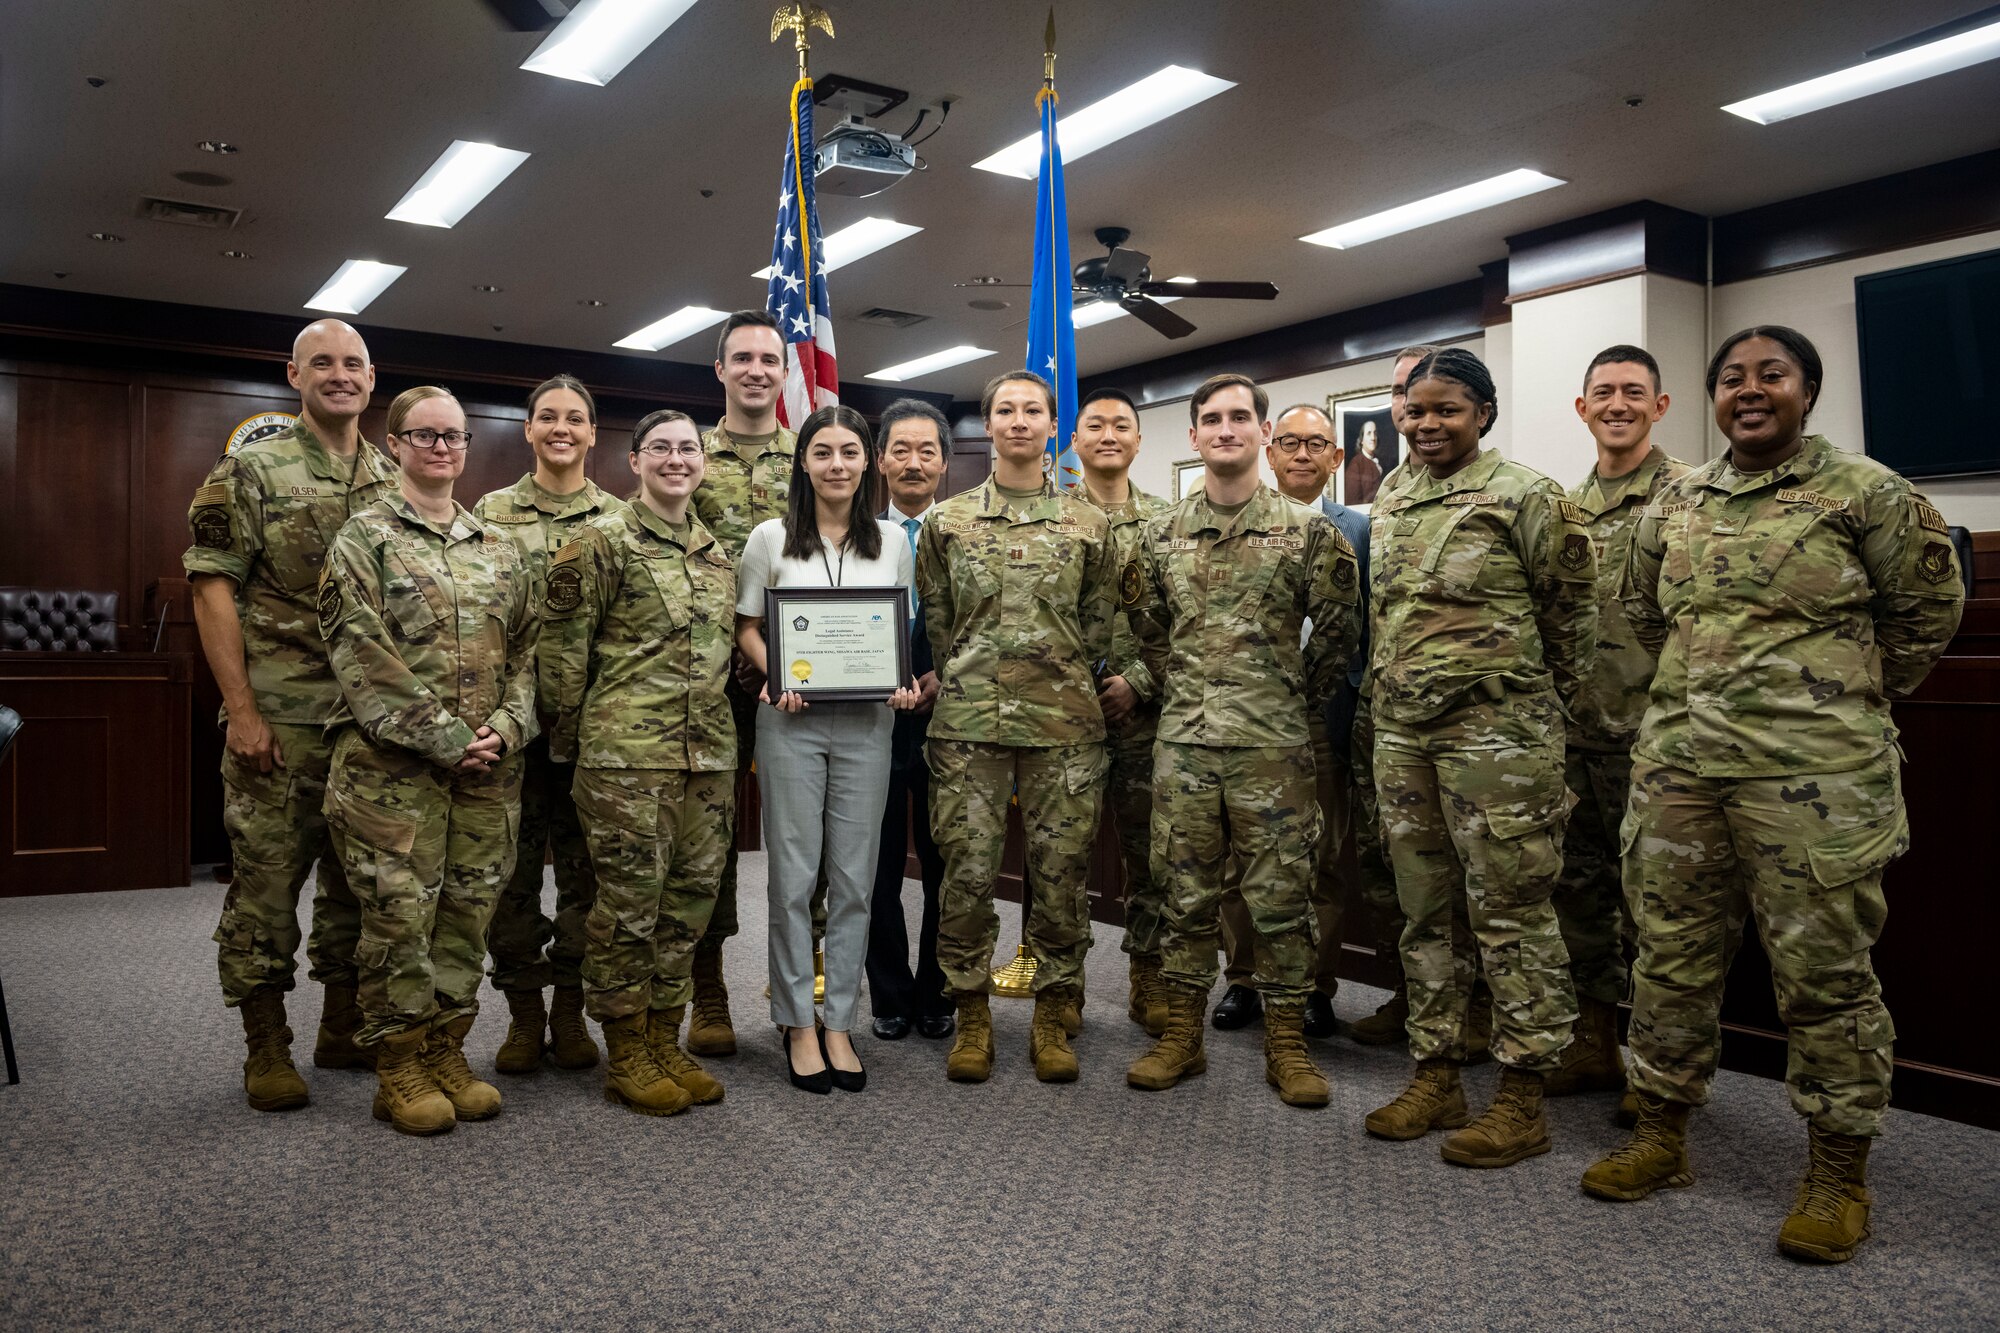 Group of military members in uniform alongside civilians hold up a certificate in a courtroom.